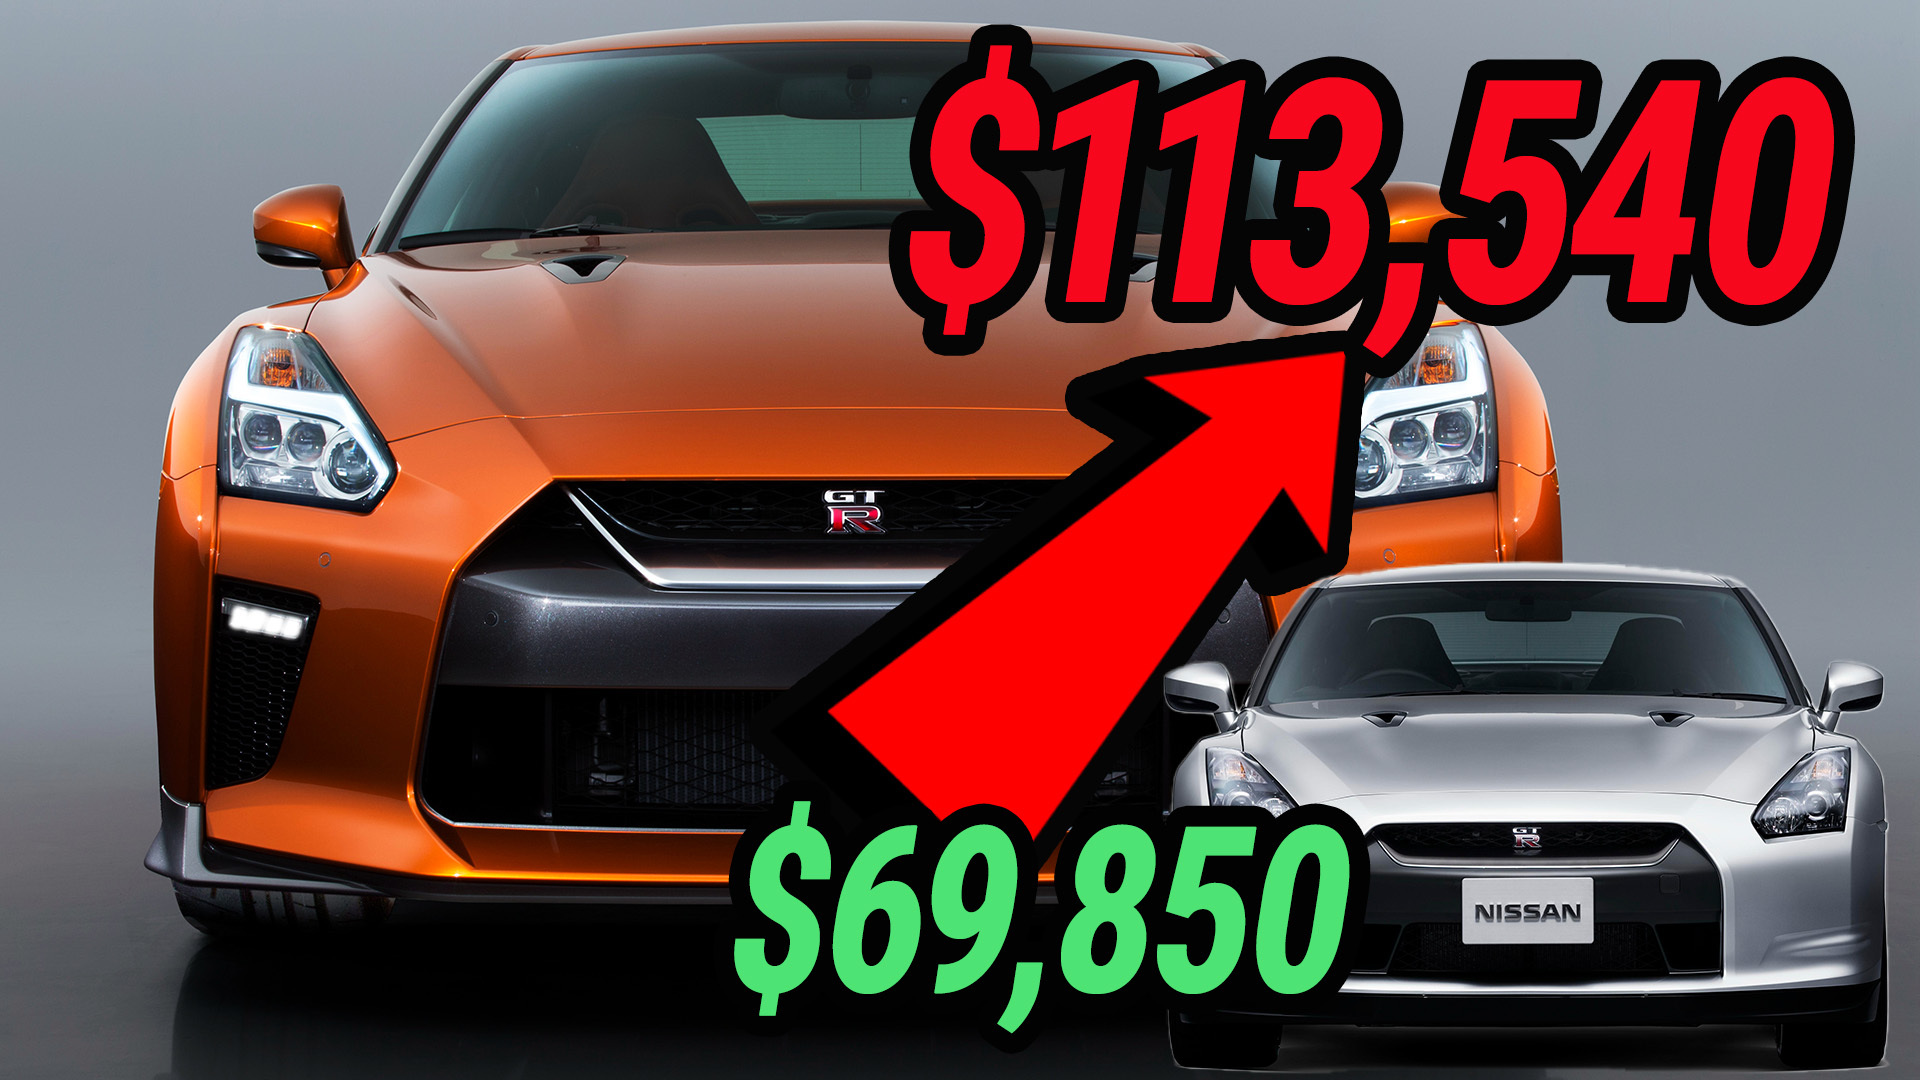 Why are GTR expensive?